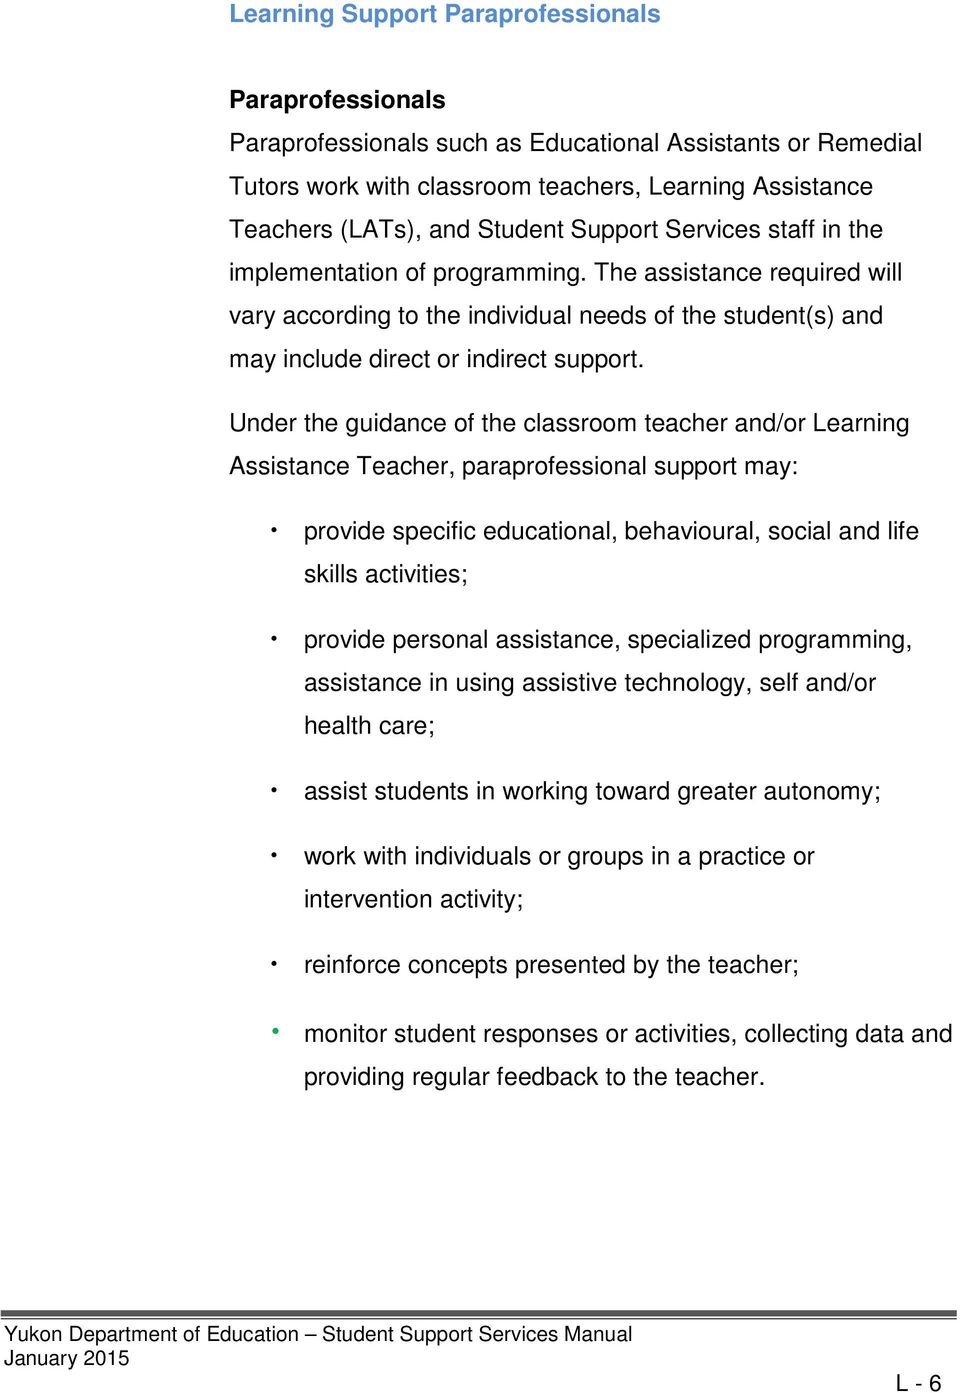 Under the guidance of the classroom teacher and/or Learning Assistance Teacher, paraprofessional support may: provide specific educational, behavioural, social and life skills activities; provide